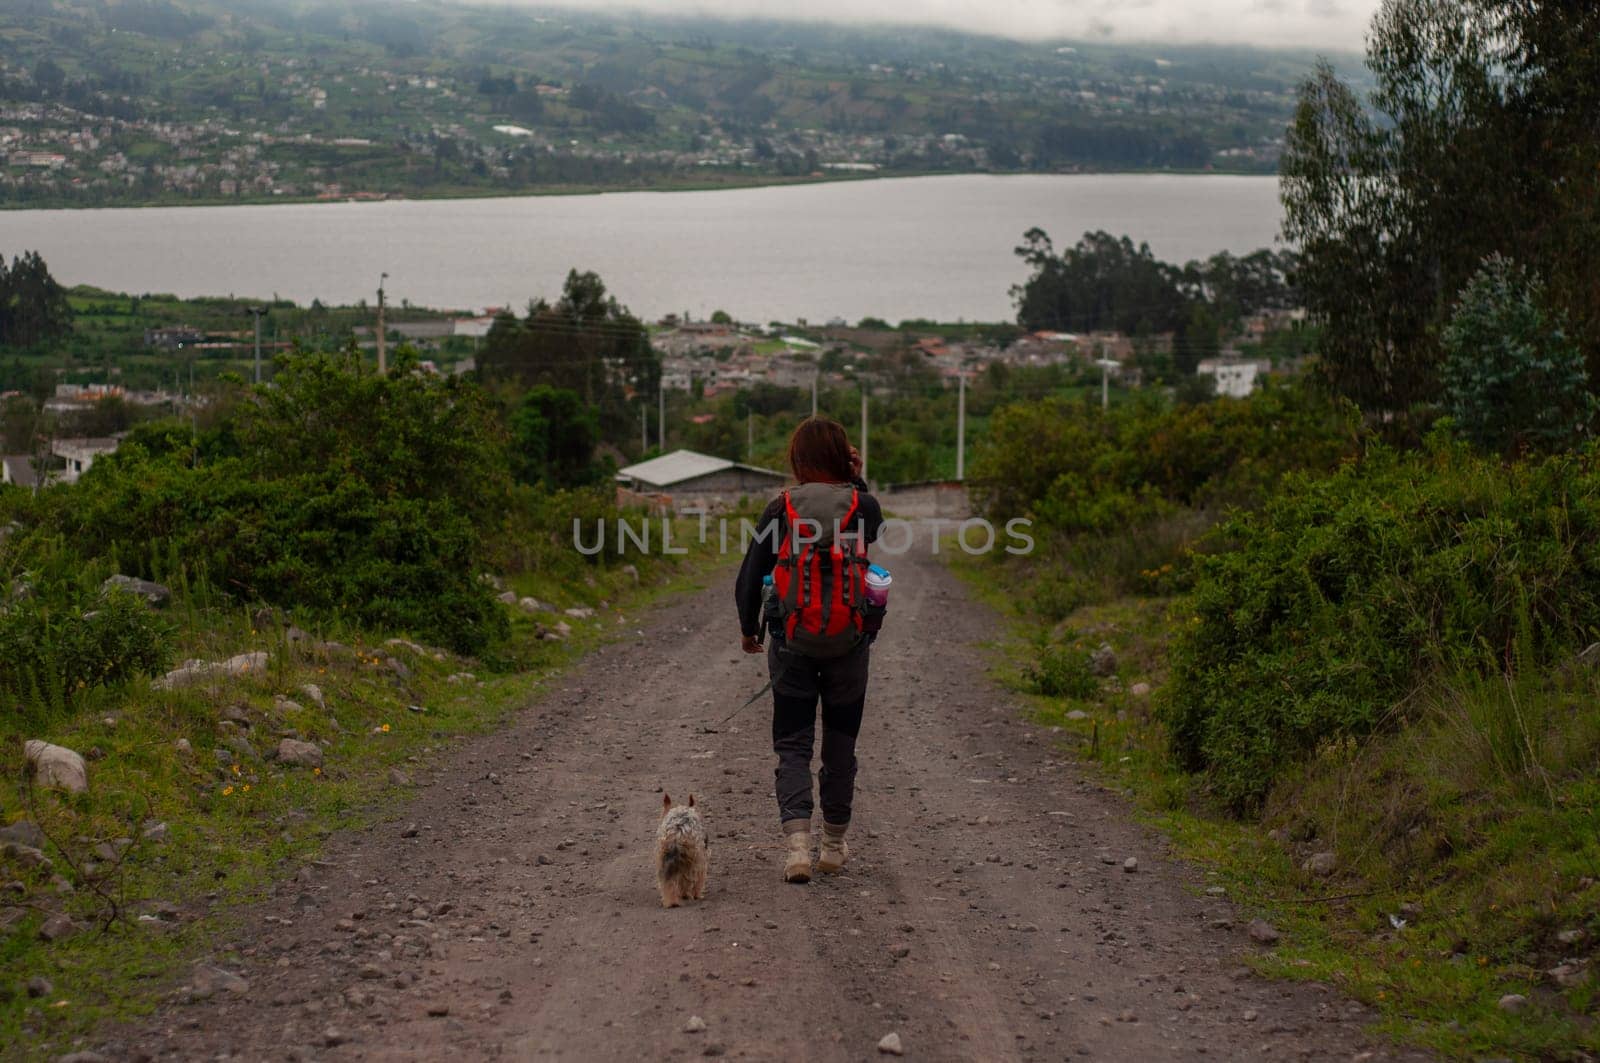 backpacker with her back to the camera, getting lost in the horizon with her beloved pet in the direction of a lagoon. by Raulmartin